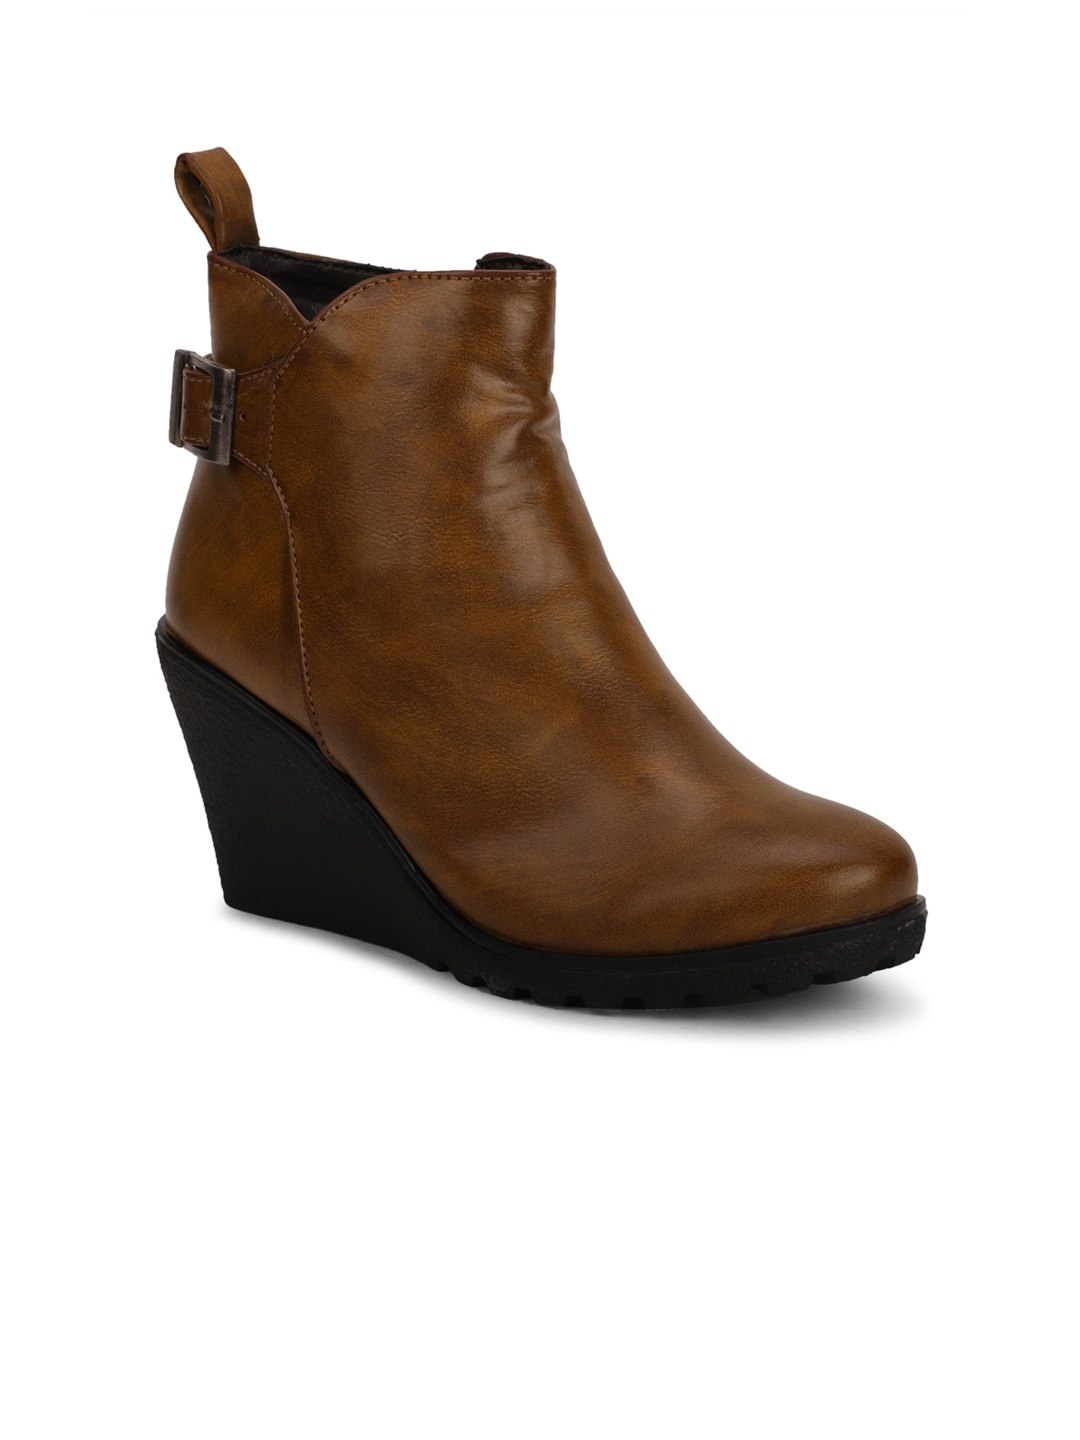 Bruno Manetti Tan Leather Wedge Heeled Boots Price in India